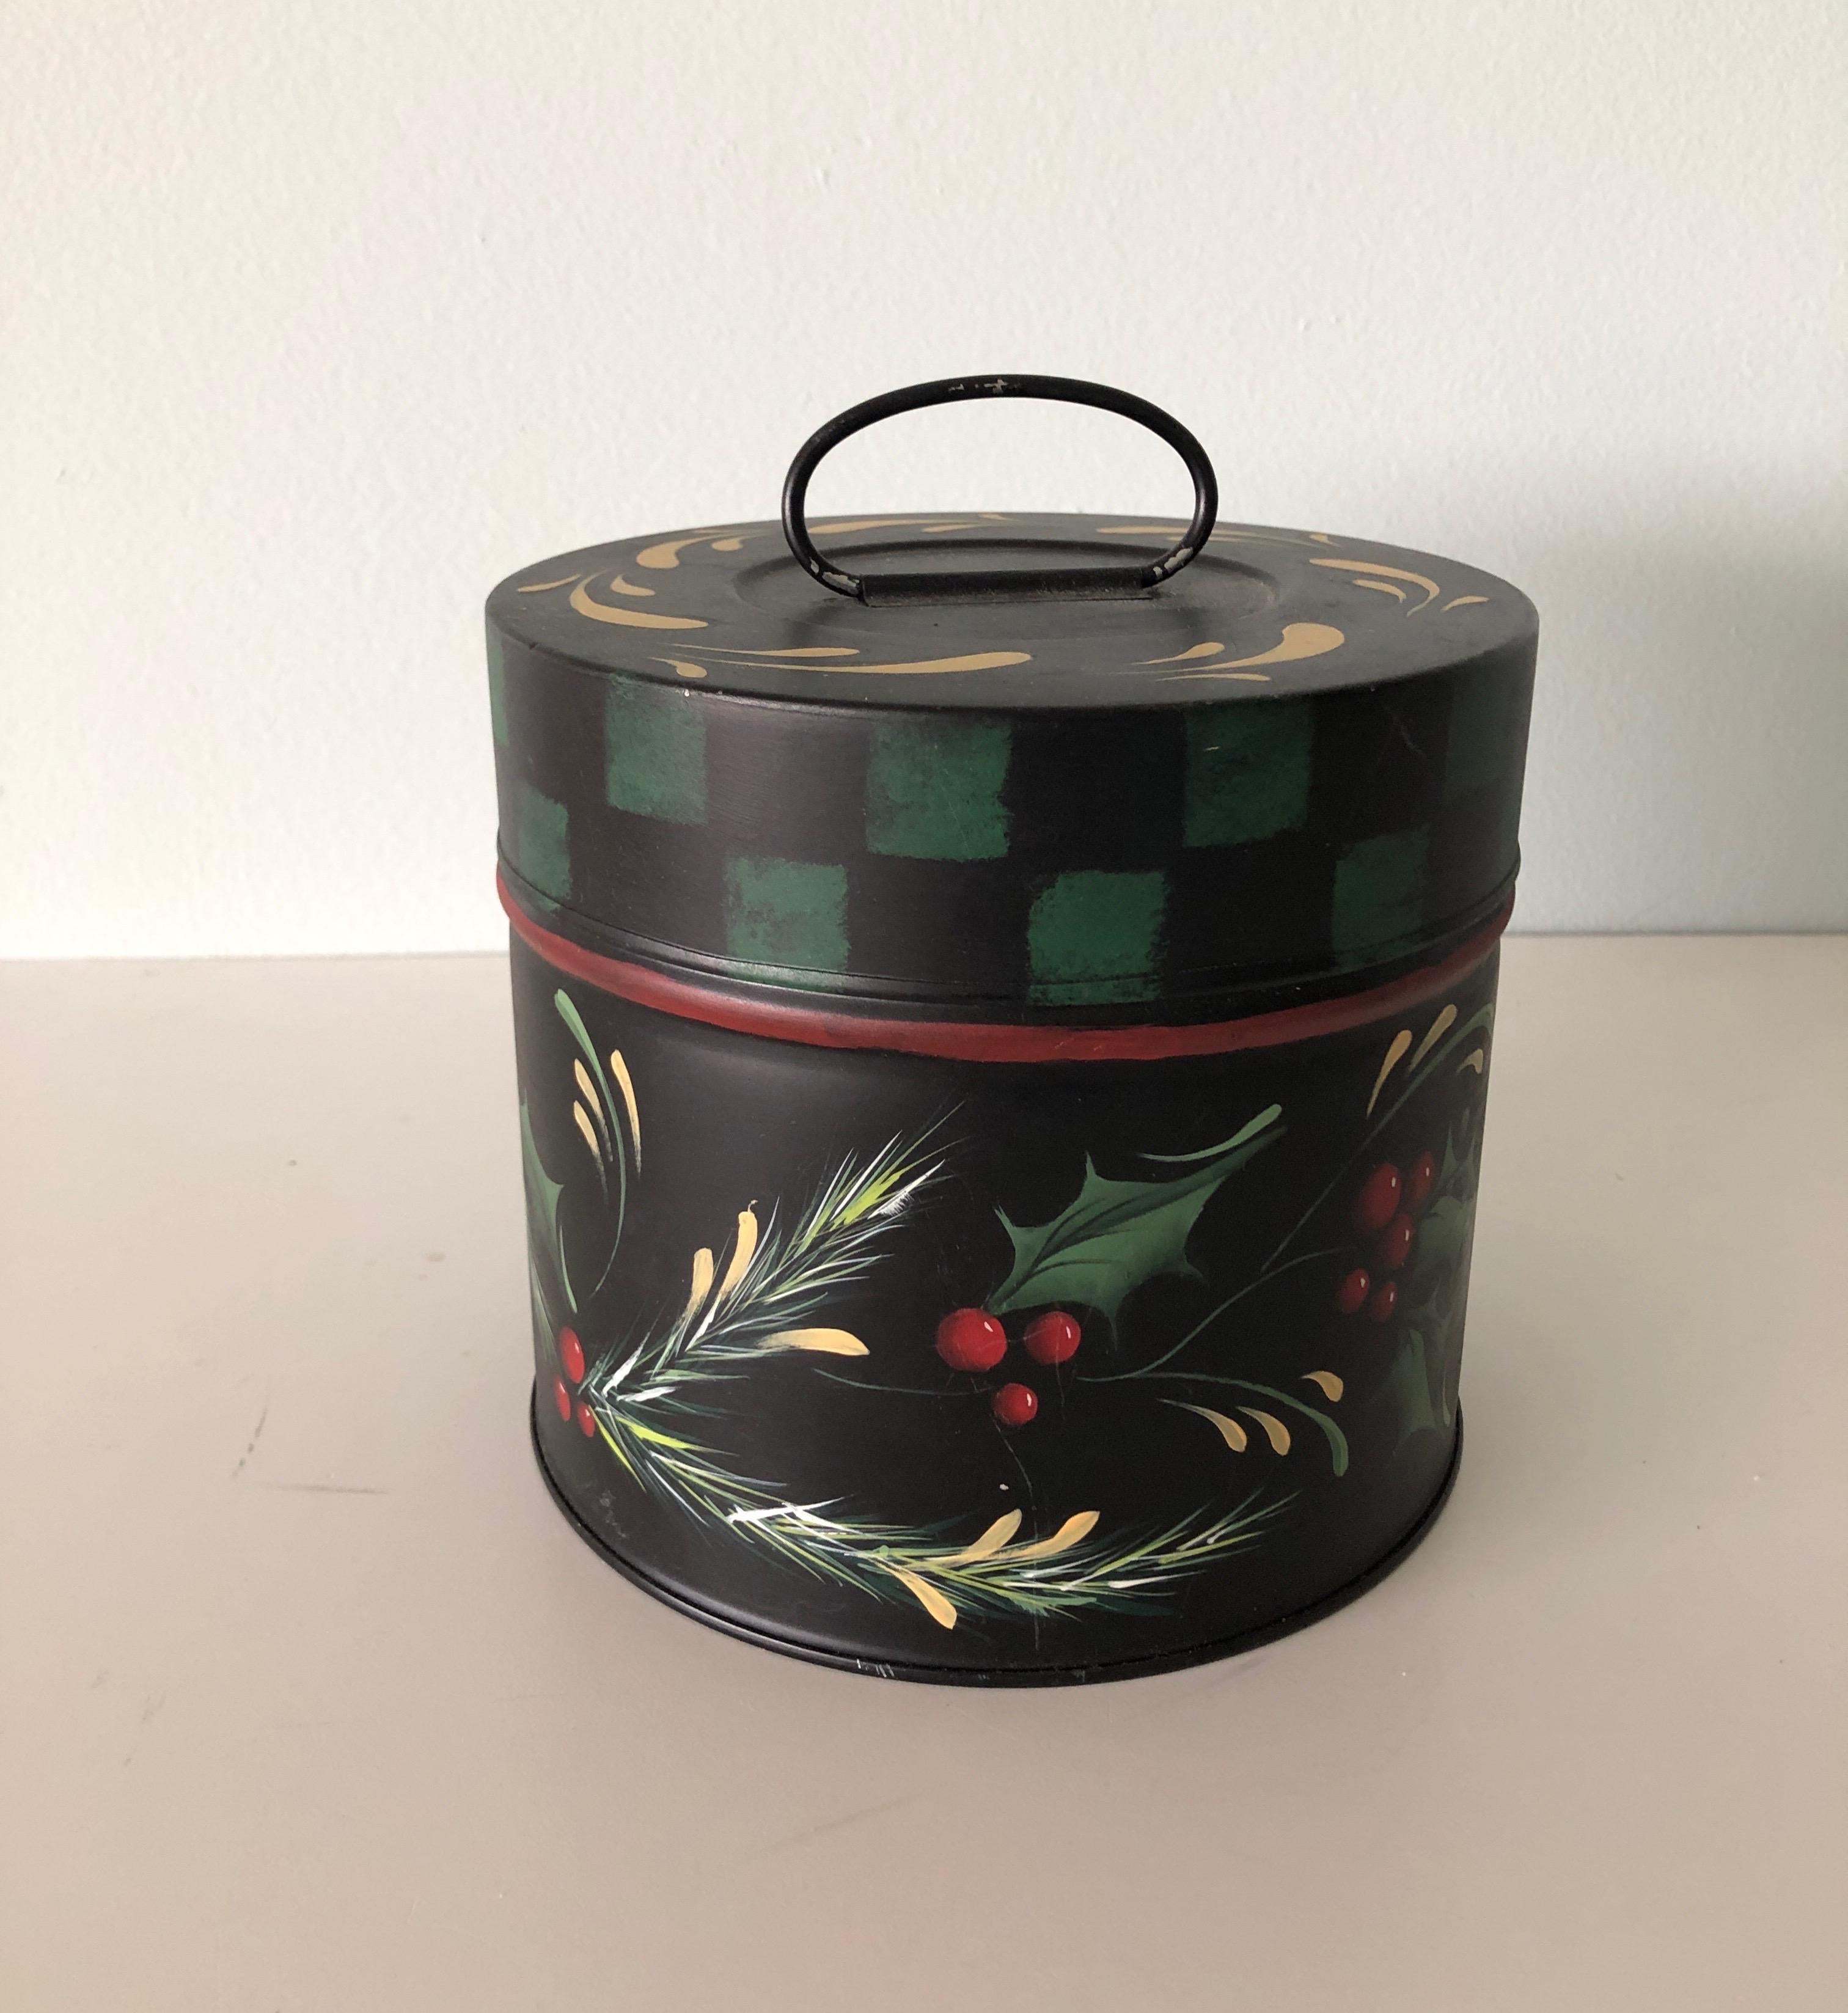 Vintage round tole hand painted canister with holiday theme hand painted details
Depicting vine and berries in the classic holiday colors of green, gold and red. 
Stamped by Sayso, 1996.
Hand painted canister with a handle and finished on all